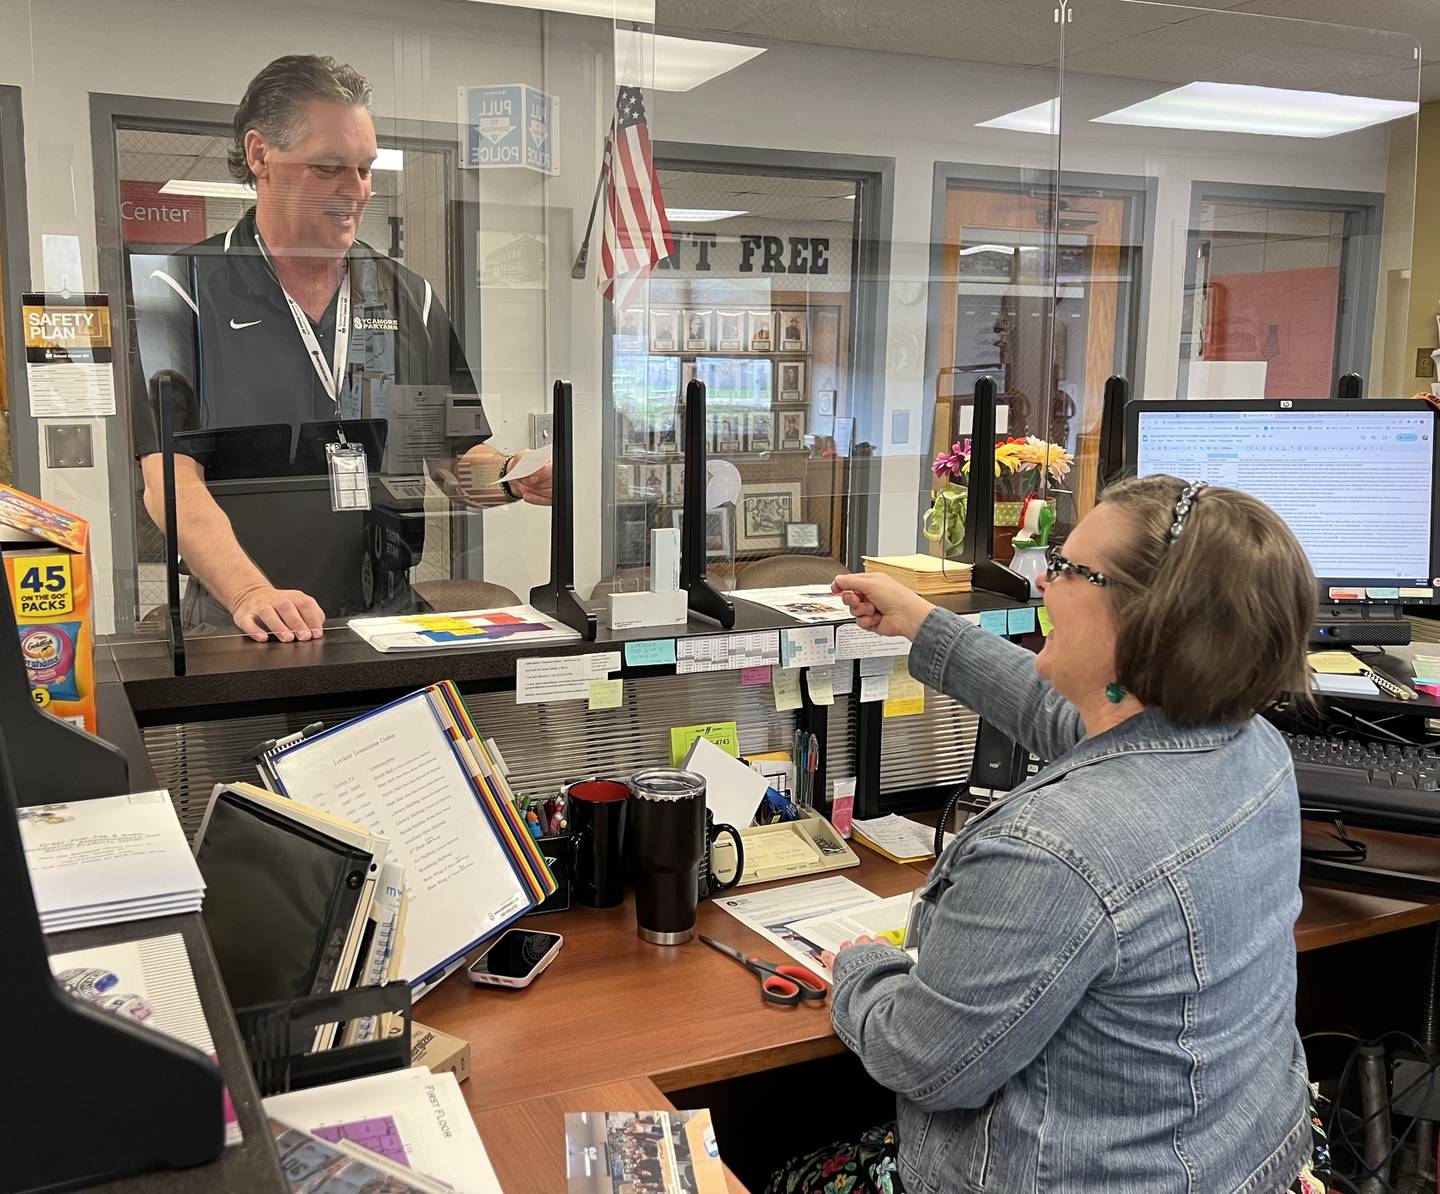 Sycamore High School Receptionist Heidi Phelps hands Sycamore High School Principal Tim Carlson a note after he returned from a meeting on April 14, 2023.